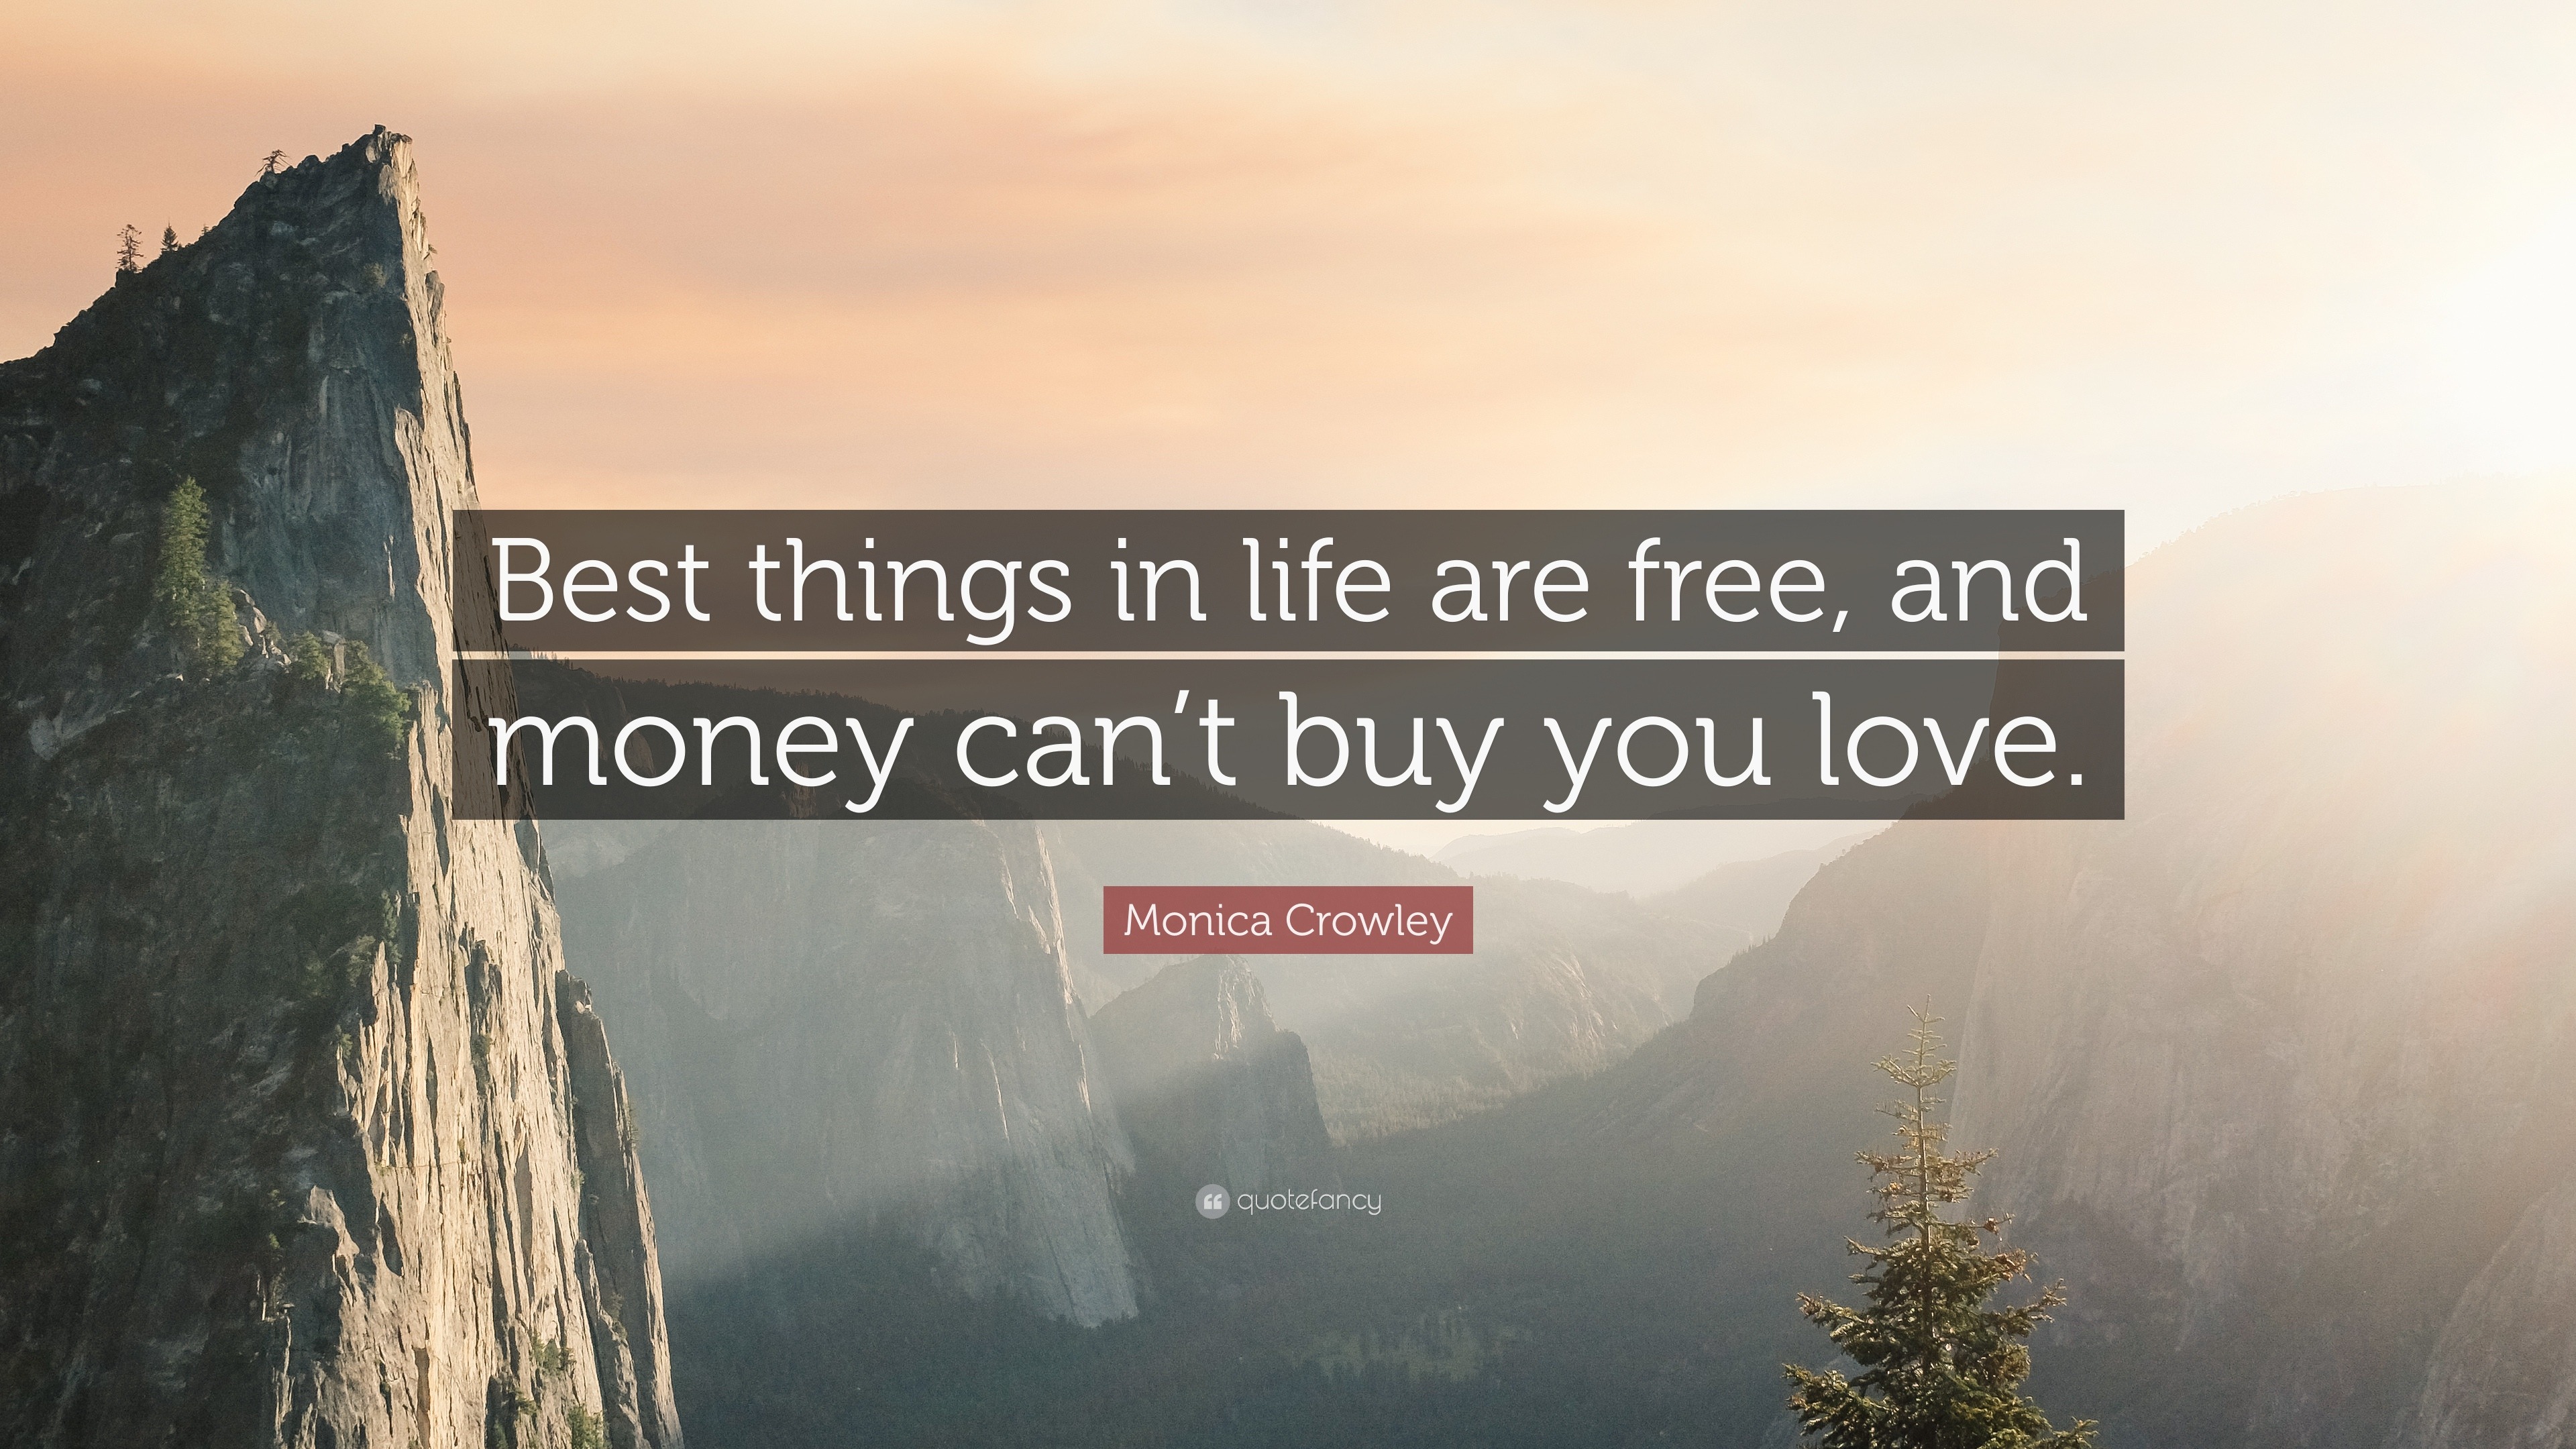 Monica Crowley Quote “Best things in life are free and money can